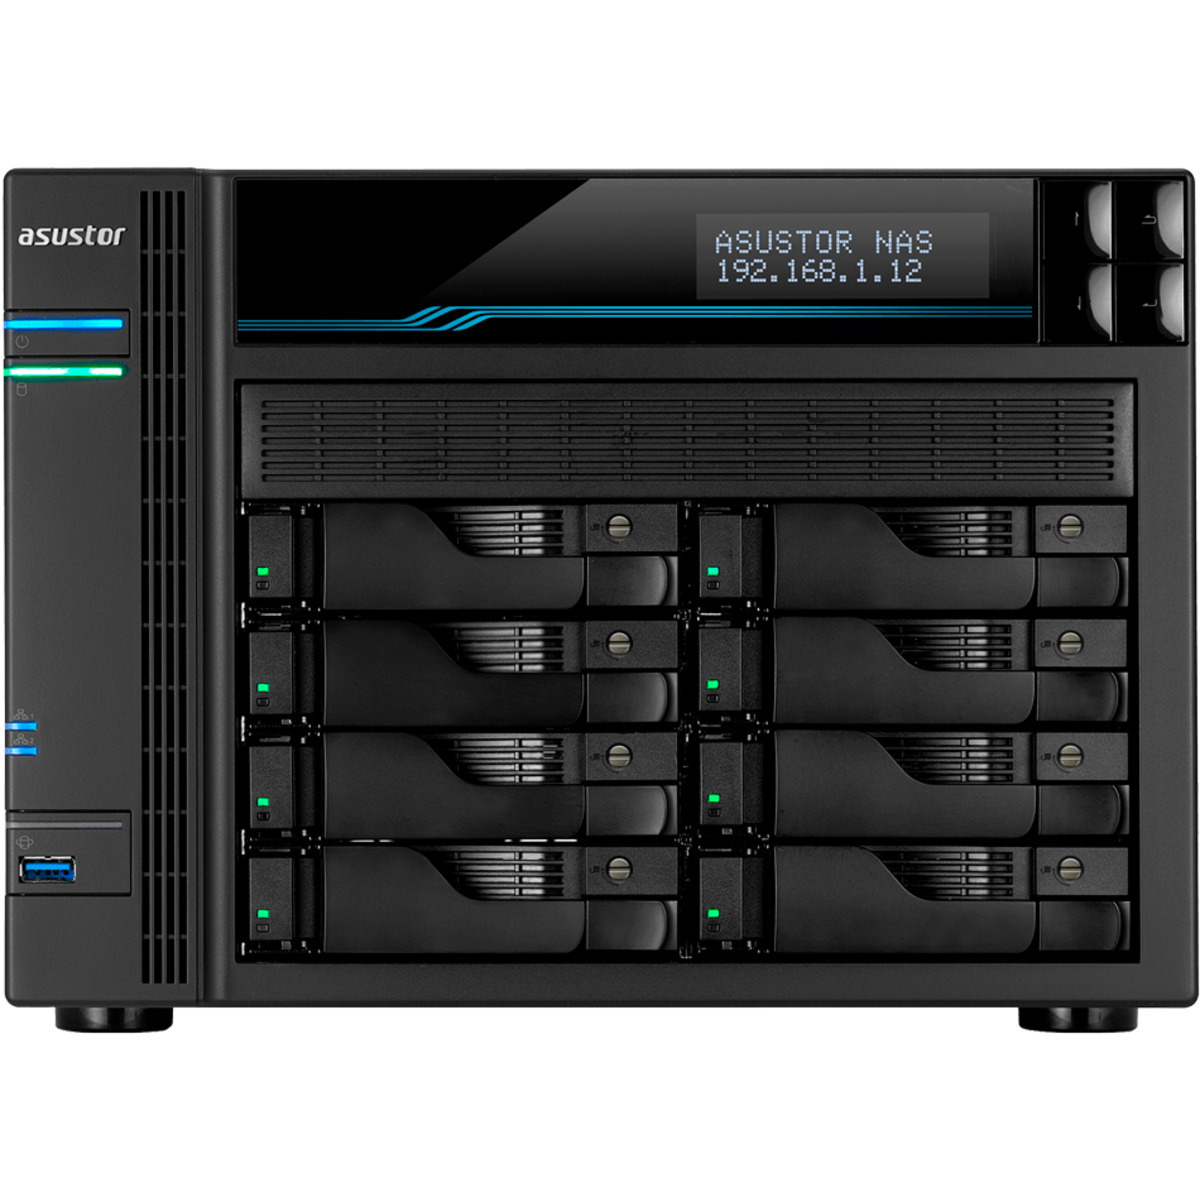 ASUSTOR AS6508T Lockerstor 8 96tb 8-Bay Desktop Multimedia / Power User / Business NAS - Network Attached Storage Device 8x12tb Western Digital Ultrastar DC HC520 HUH721212ALE600 3.5 7200rpm SATA 6Gb/s HDD ENTERPRISE Class Drives Installed - Burn-In Tested - ON SALE - FREE RAM UPGRADE AS6508T Lockerstor 8